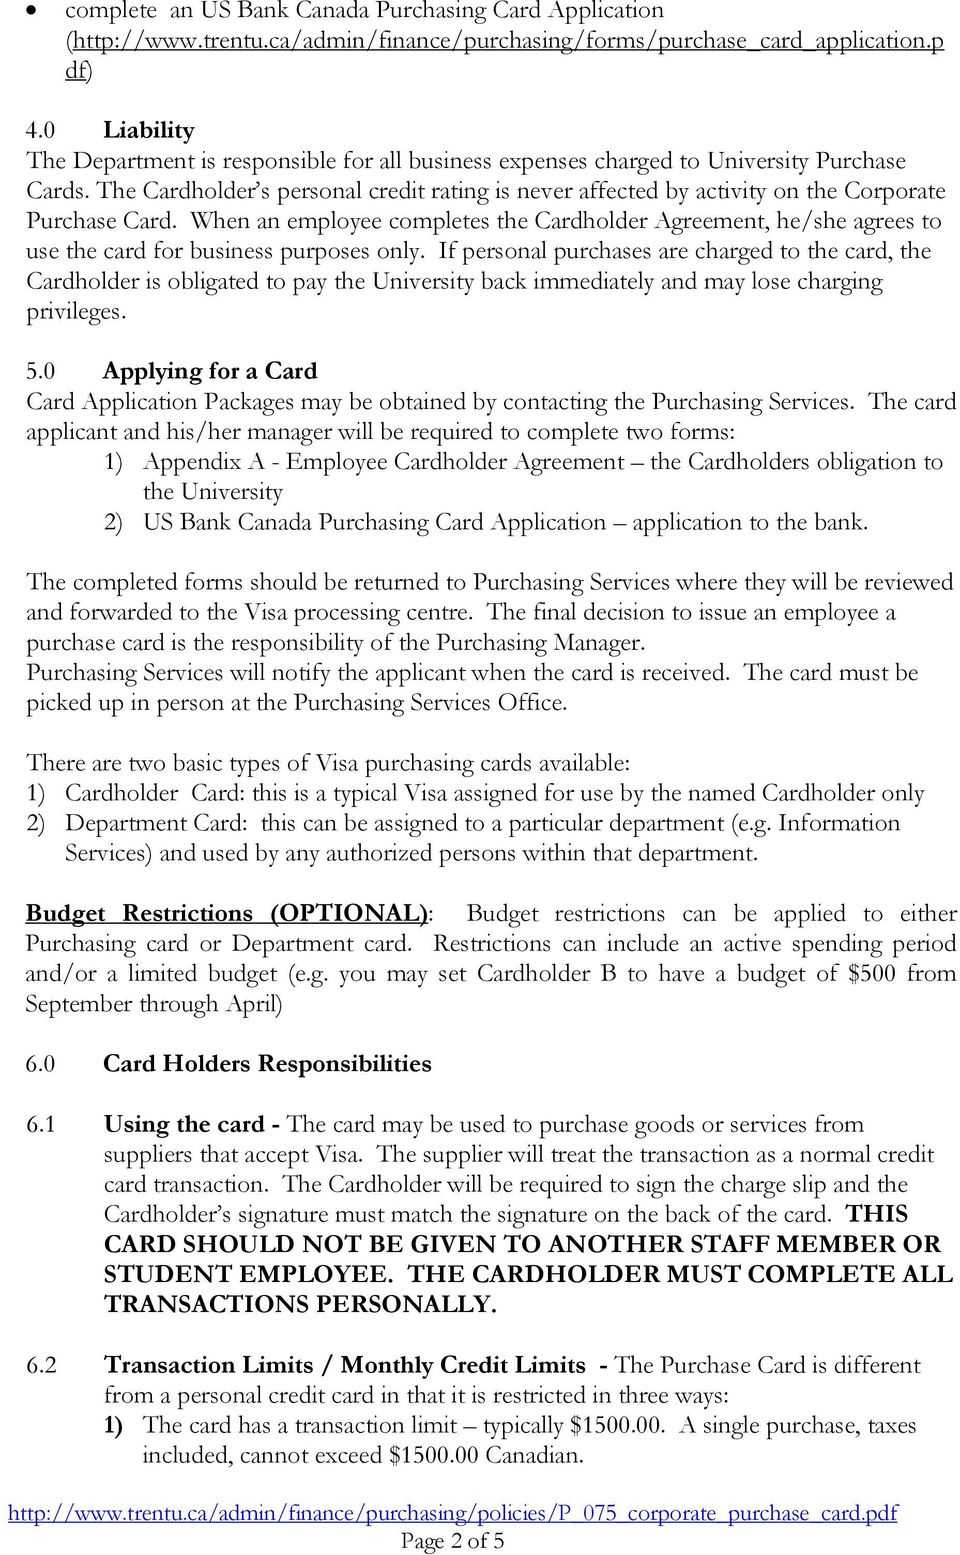 Corporate Purchase Pur – Pdf Free Download Pertaining To Corporate Credit Card Agreement Template